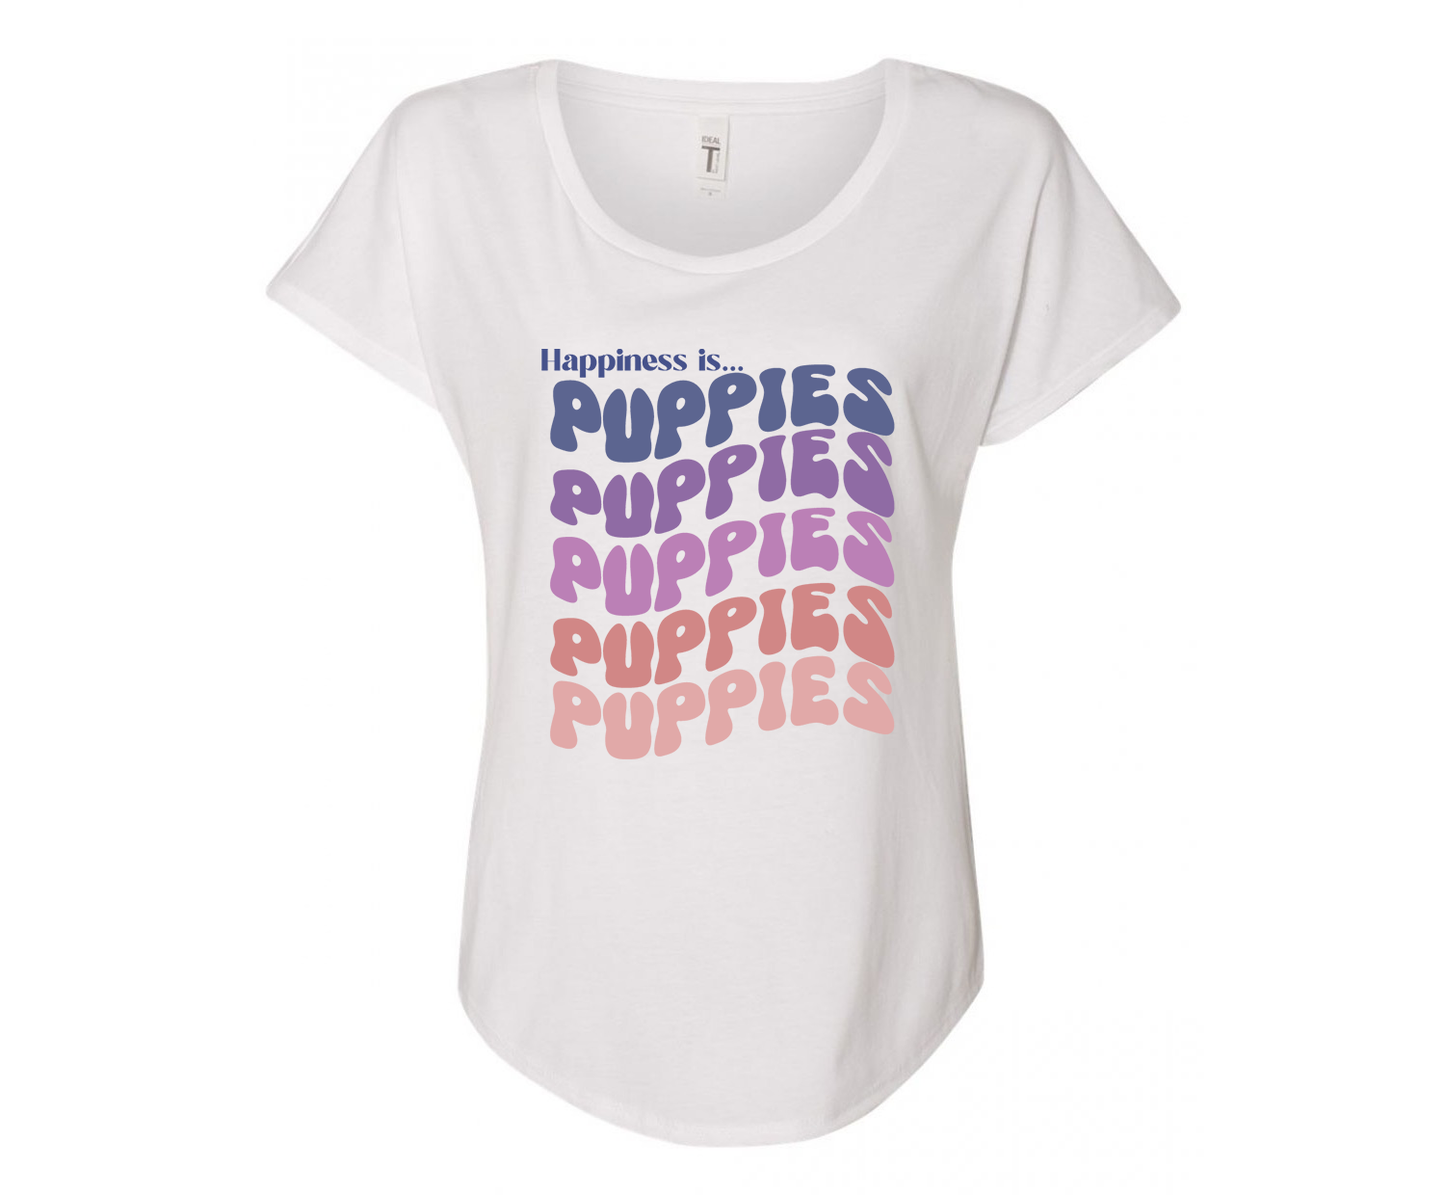 Happiness is Puppies Ladies Tee Shirt - In White & Grey